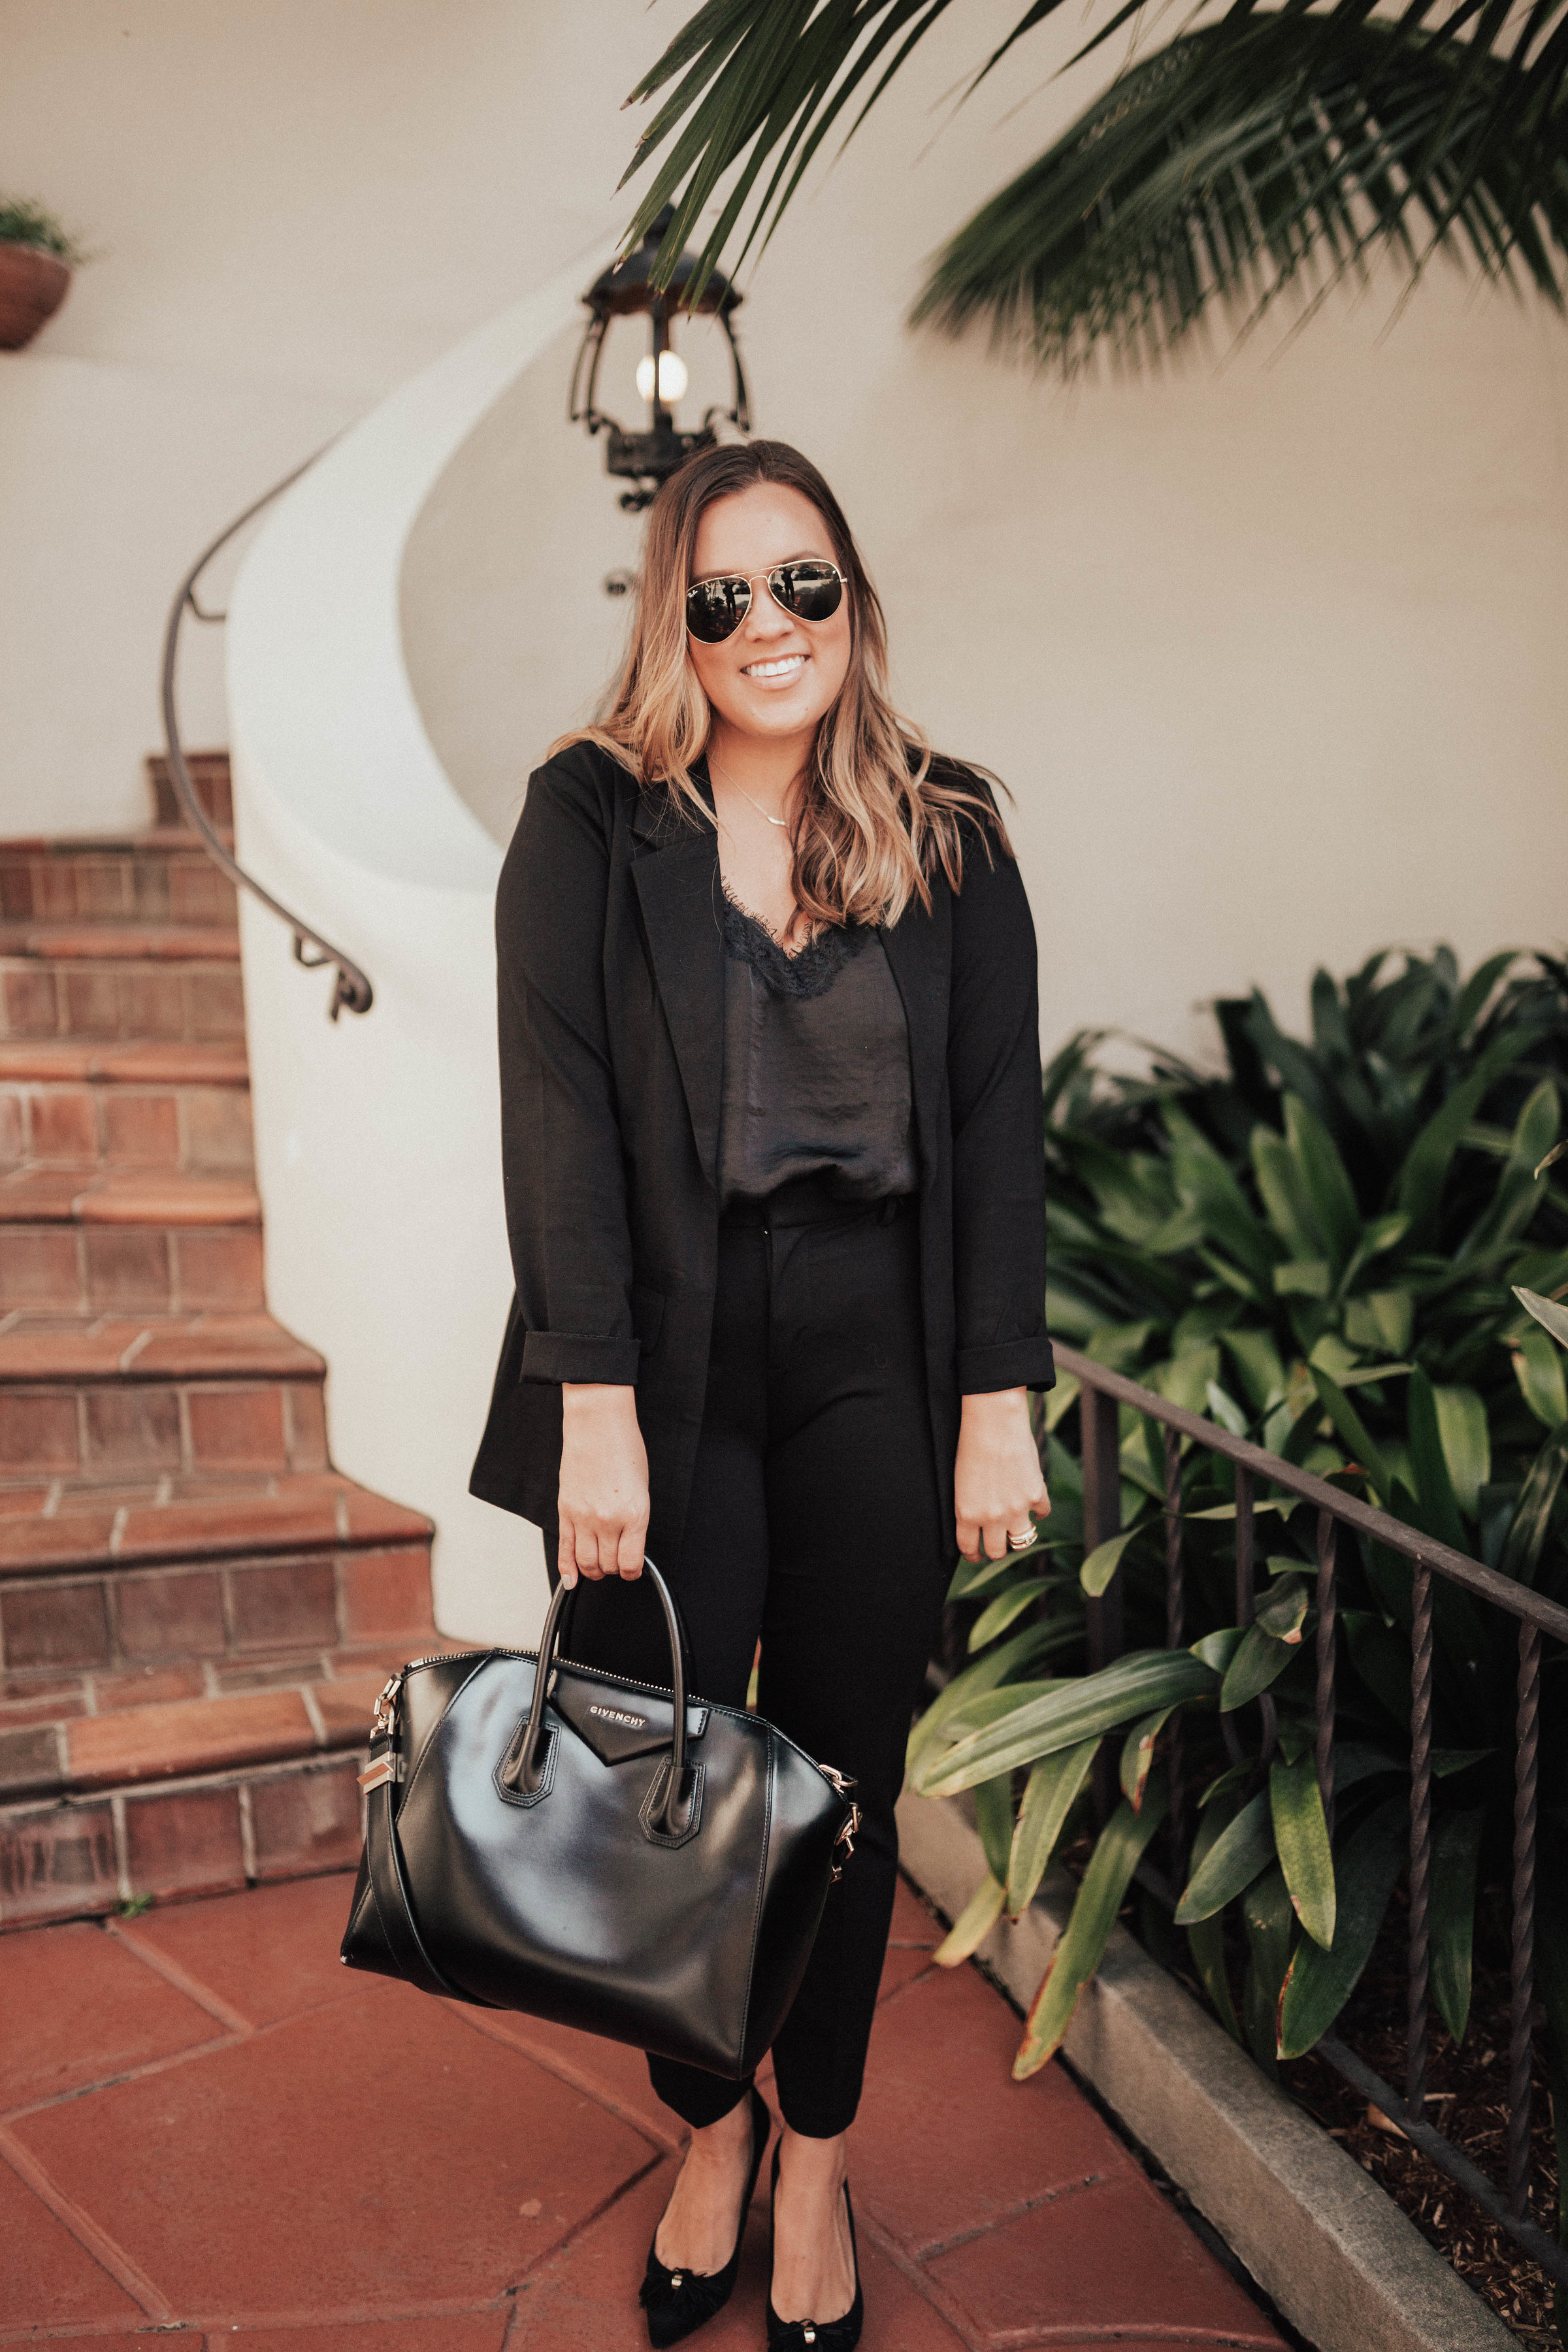 Ashley Zeal from Two Peas in a Prada shares a versatile workwear look. She is wearing separates by Liverpool, available online and in stores at Bloomingdales.